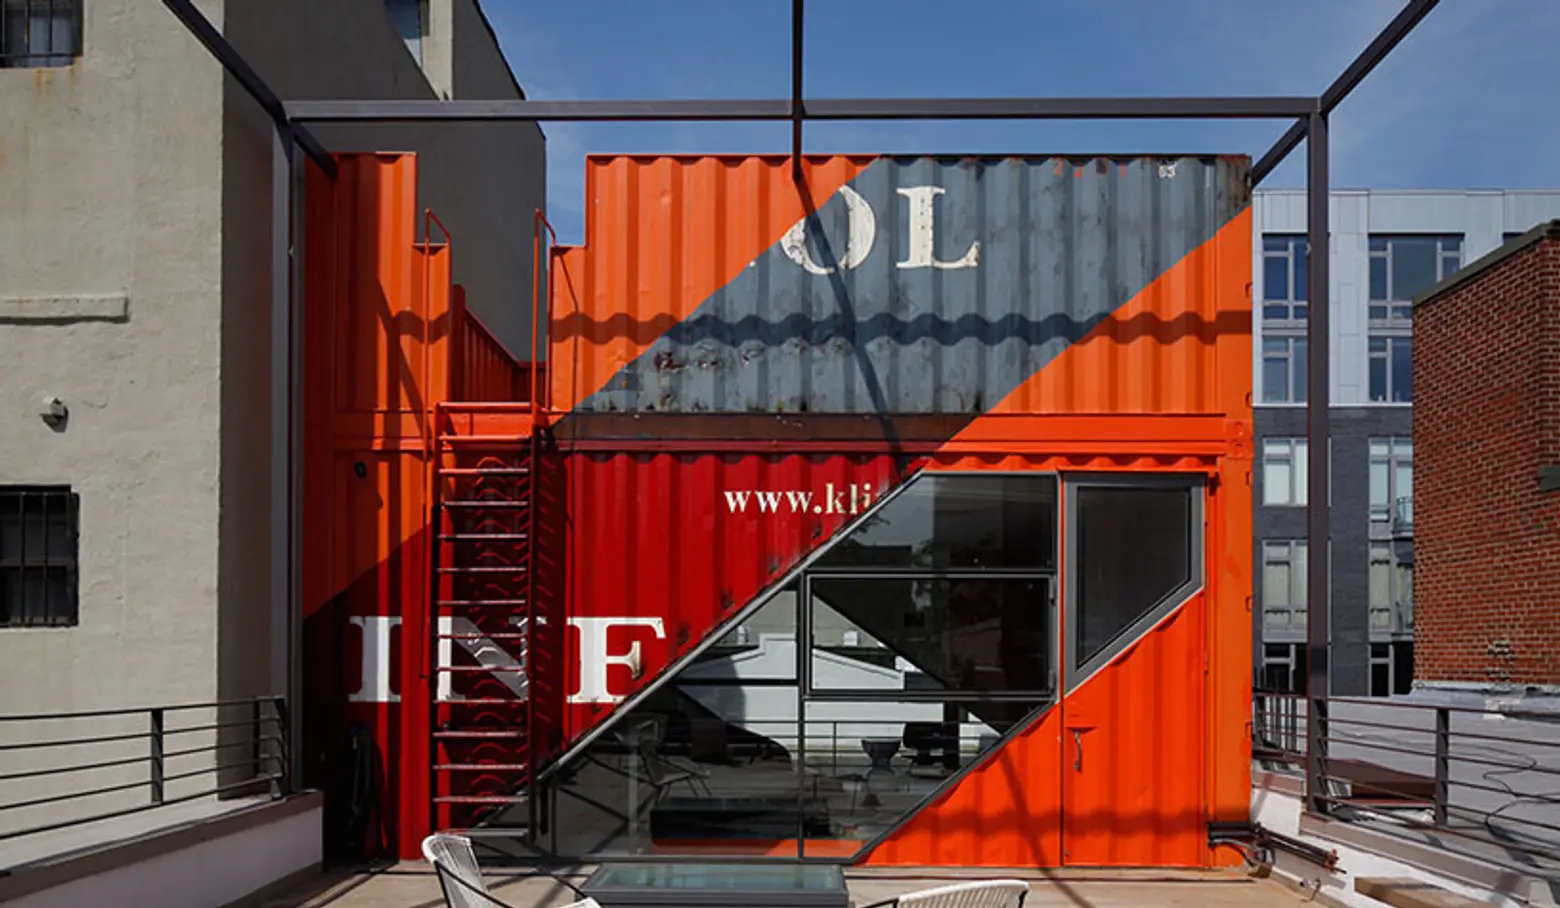 LOT-EK shipping container brooklyn carraige house, shipping container architecture, lot-ek, lot-ek nyc